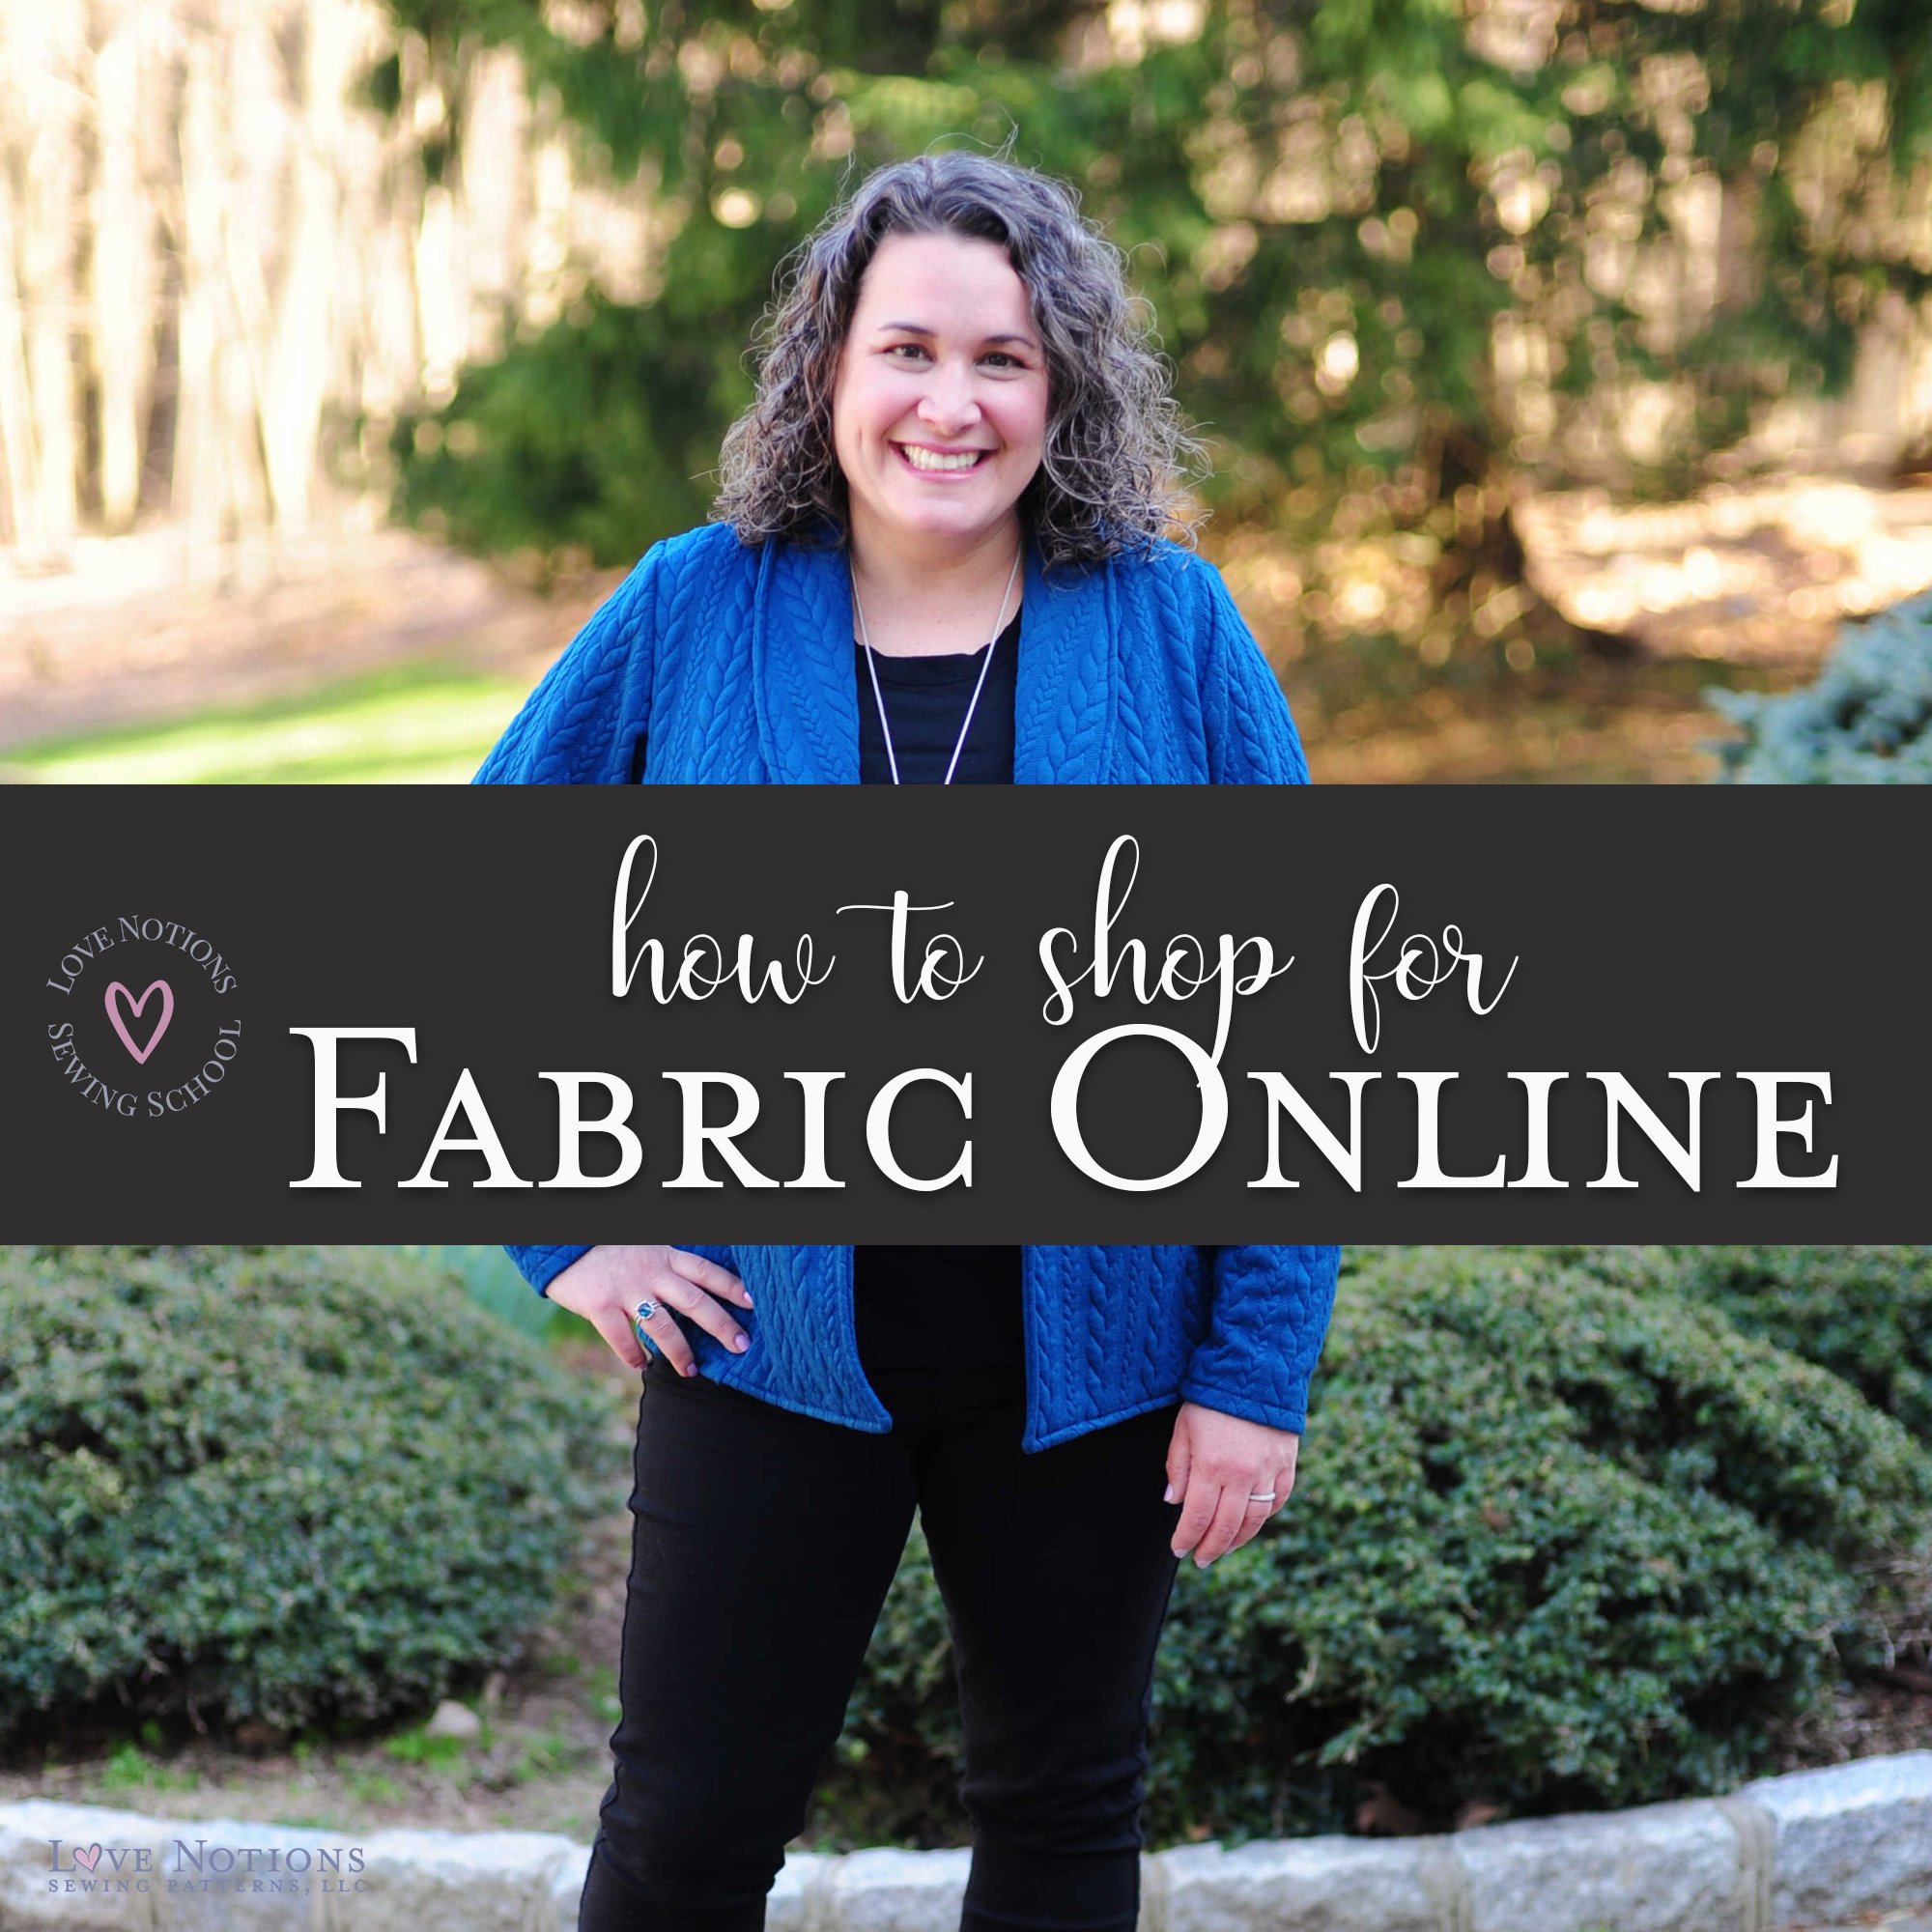 How to Shop for Fabric Online - Love Notions Sewing Patterns